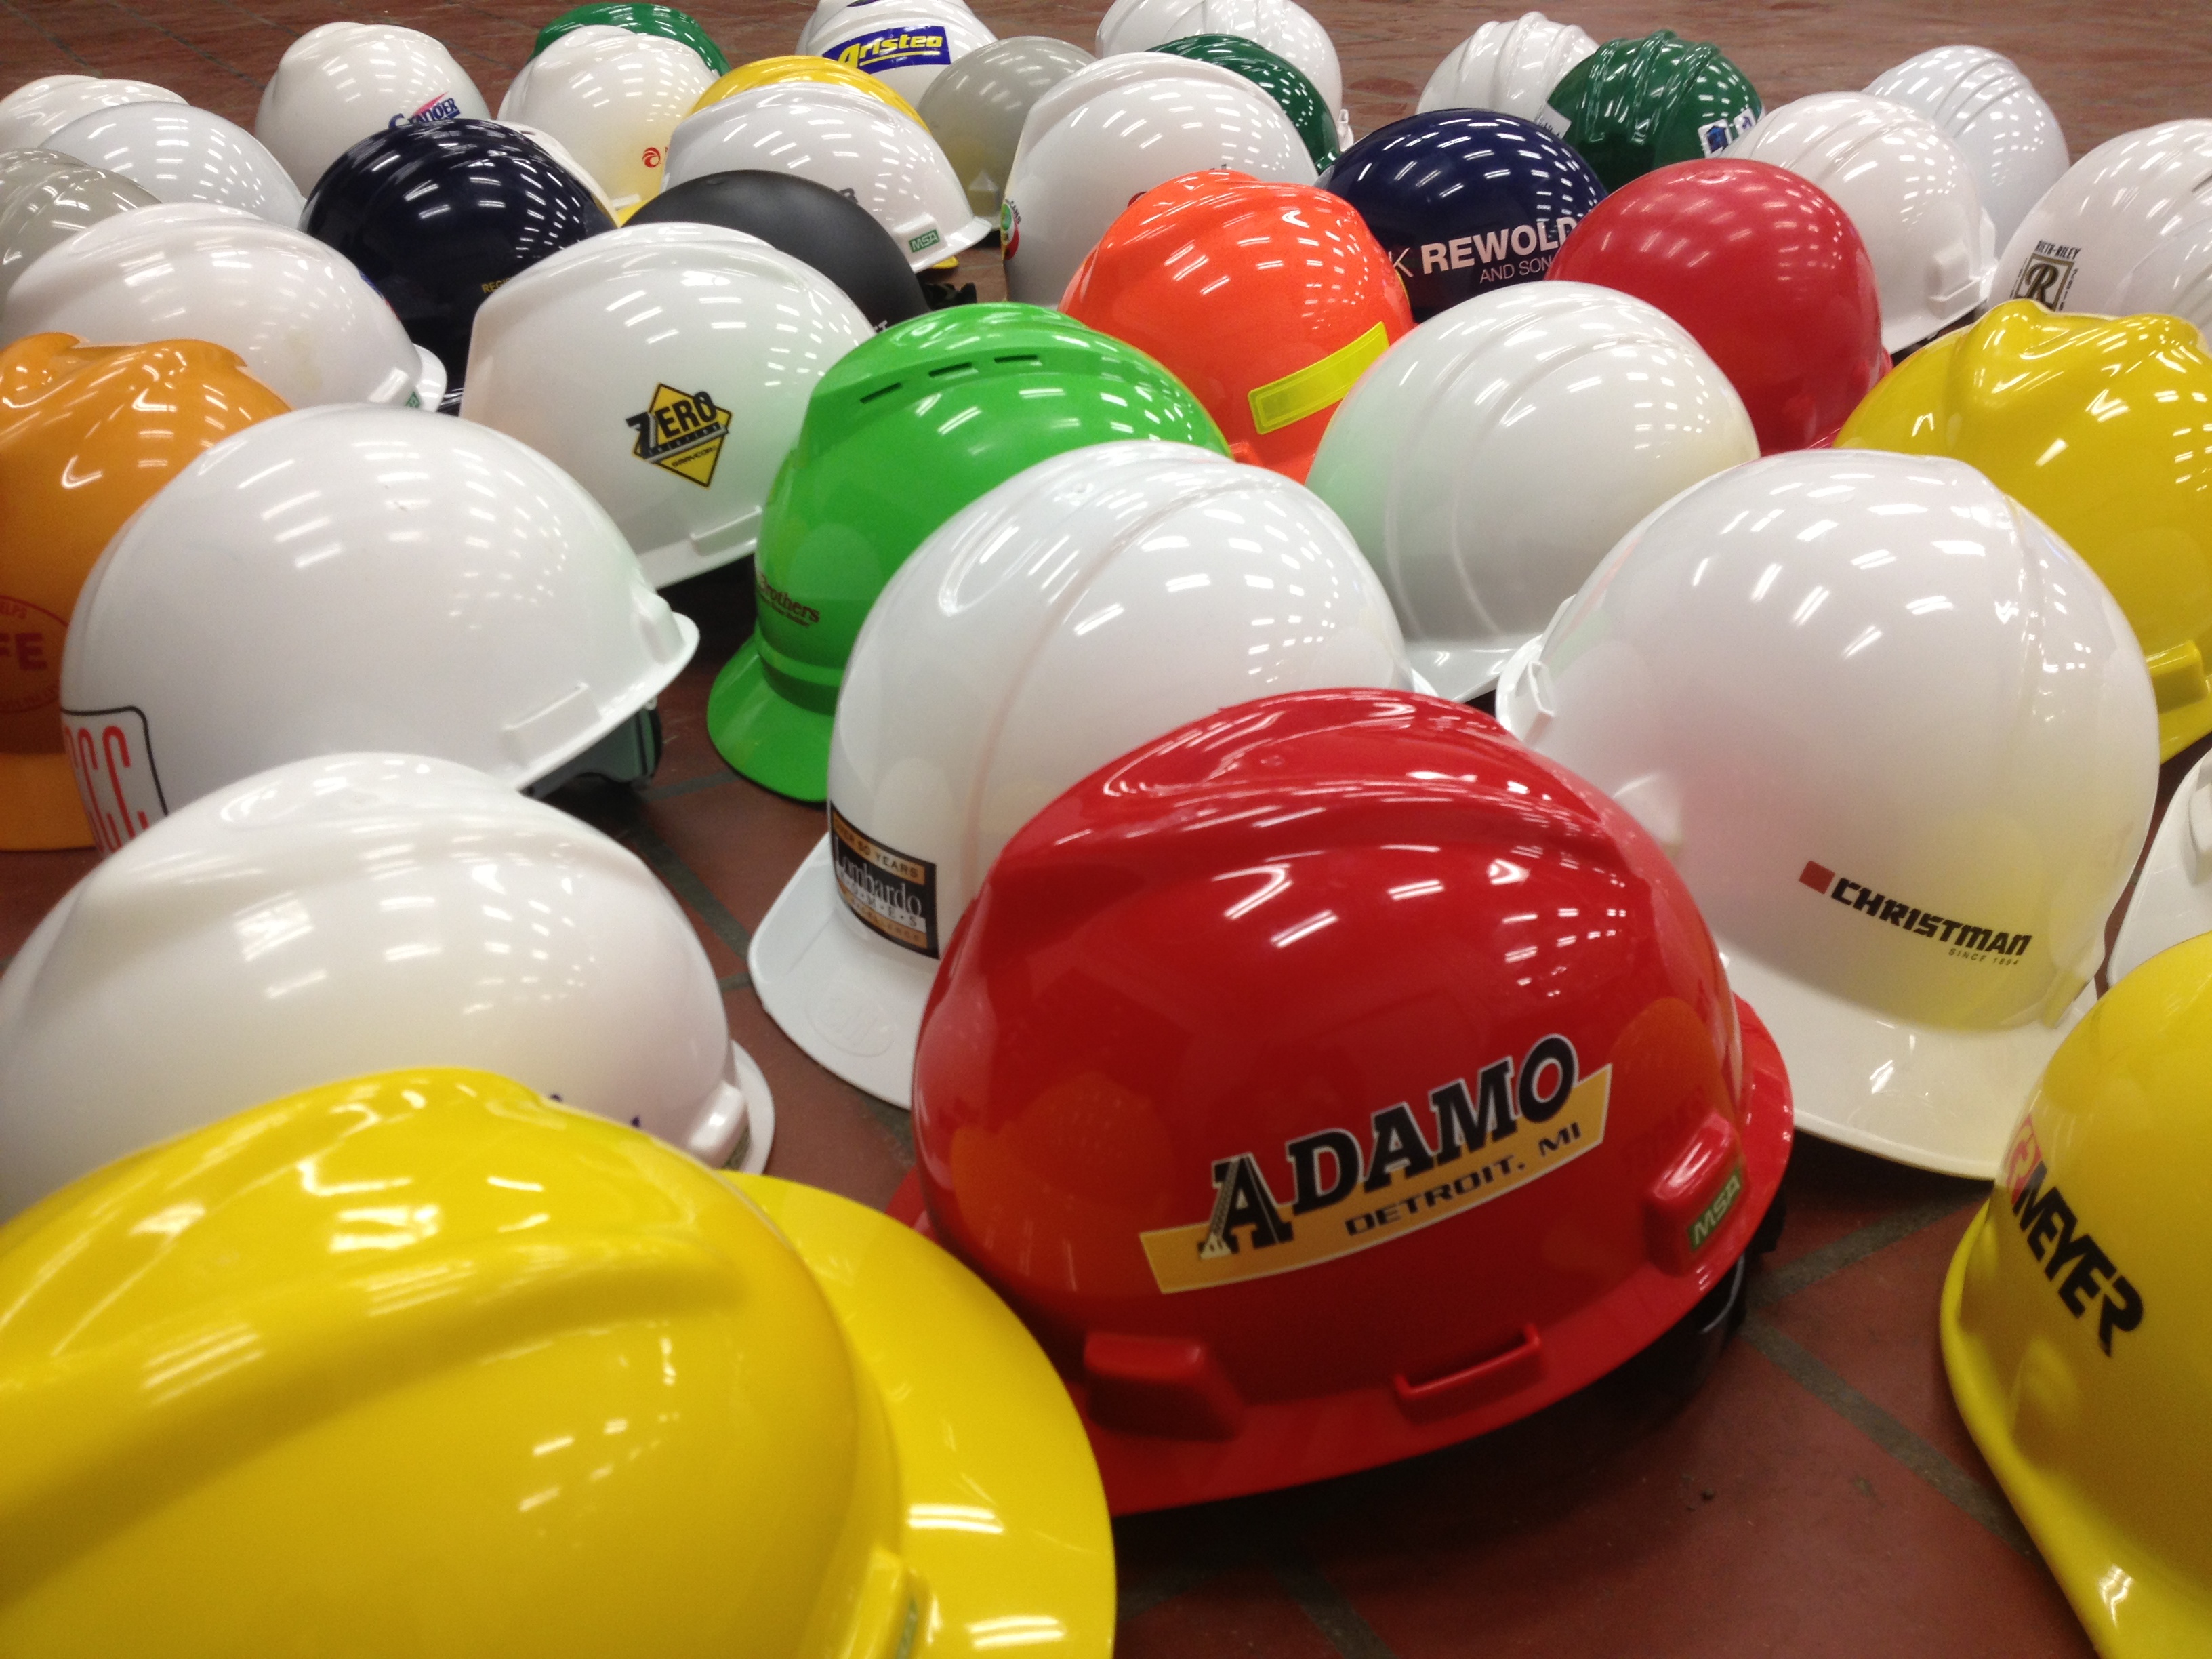 Photo showing several hard hats grouped together.